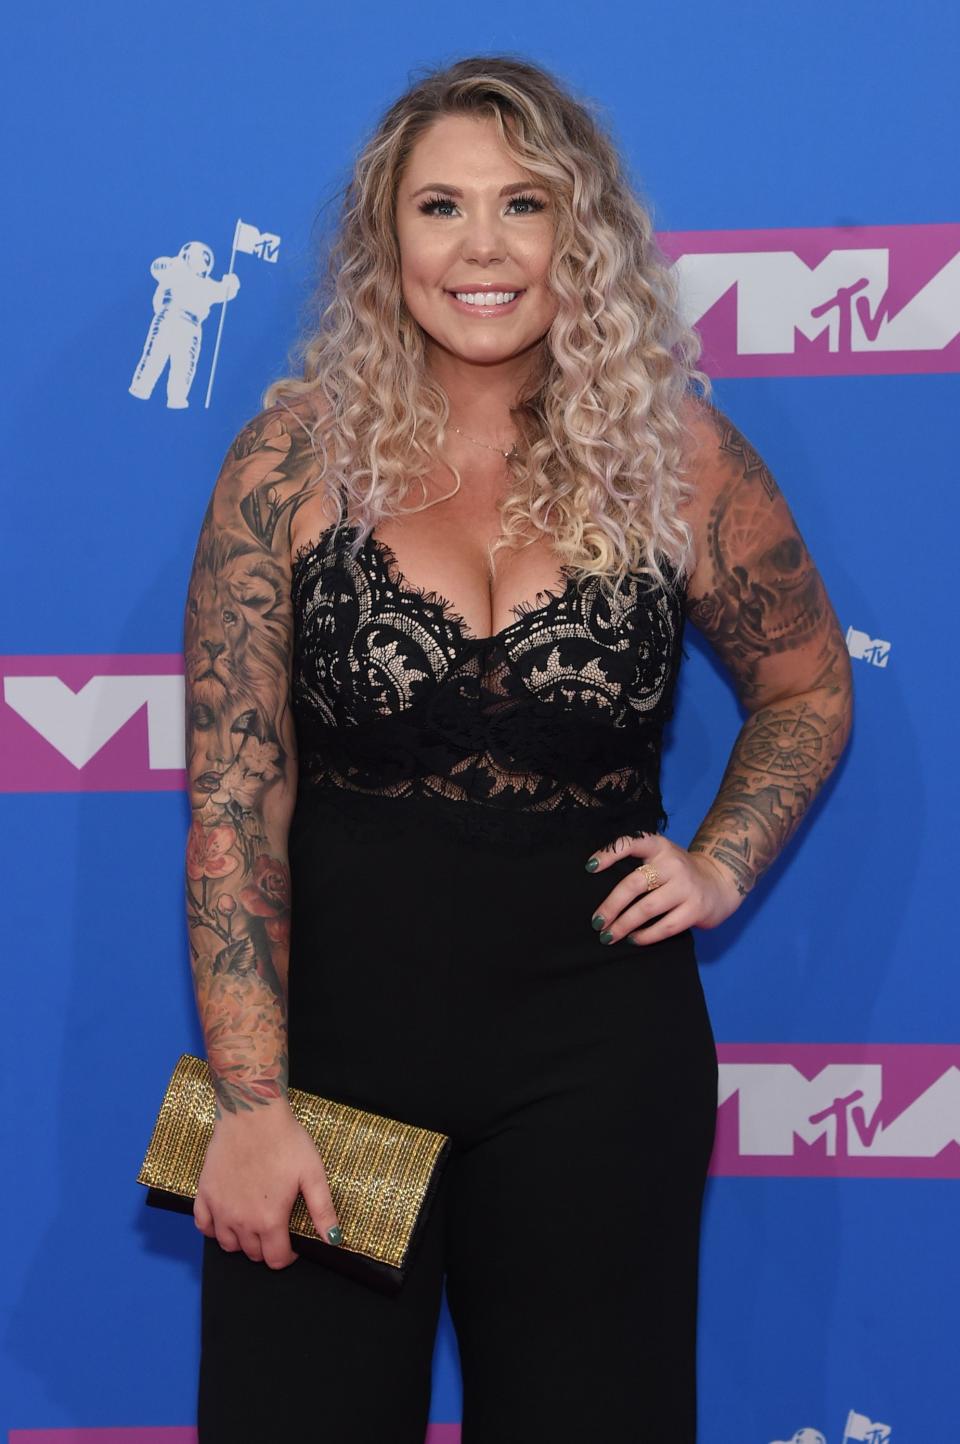 Kailyn Lowry sports an amazing black jumpsuit that leaves nothing to imagination in her cleavage area